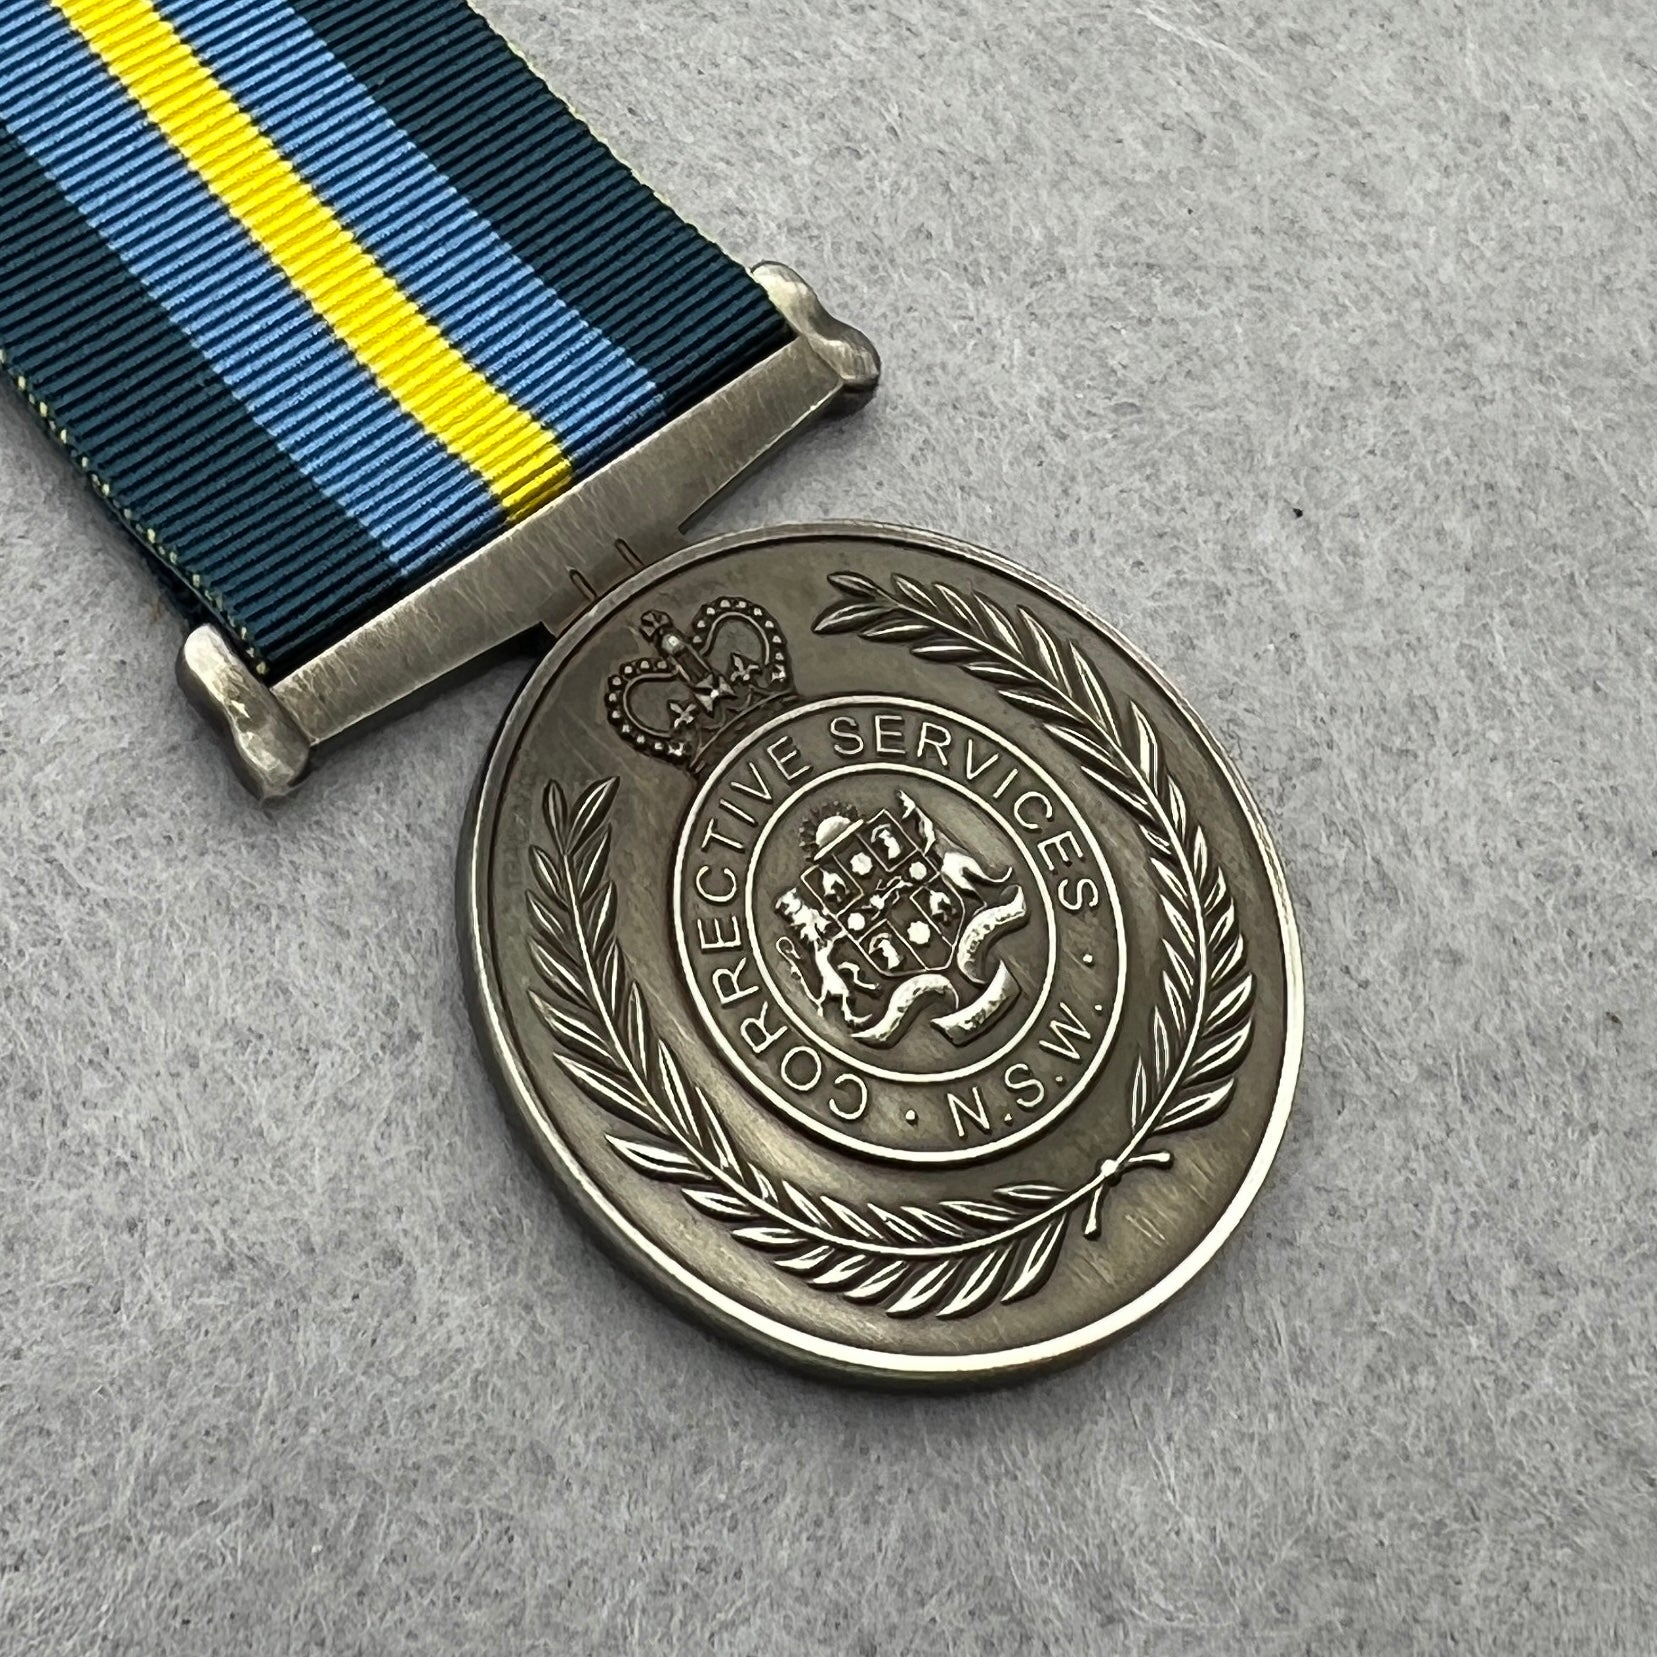 NSW Corrective Services Semper Deinceps Medal - Foxhole Medals